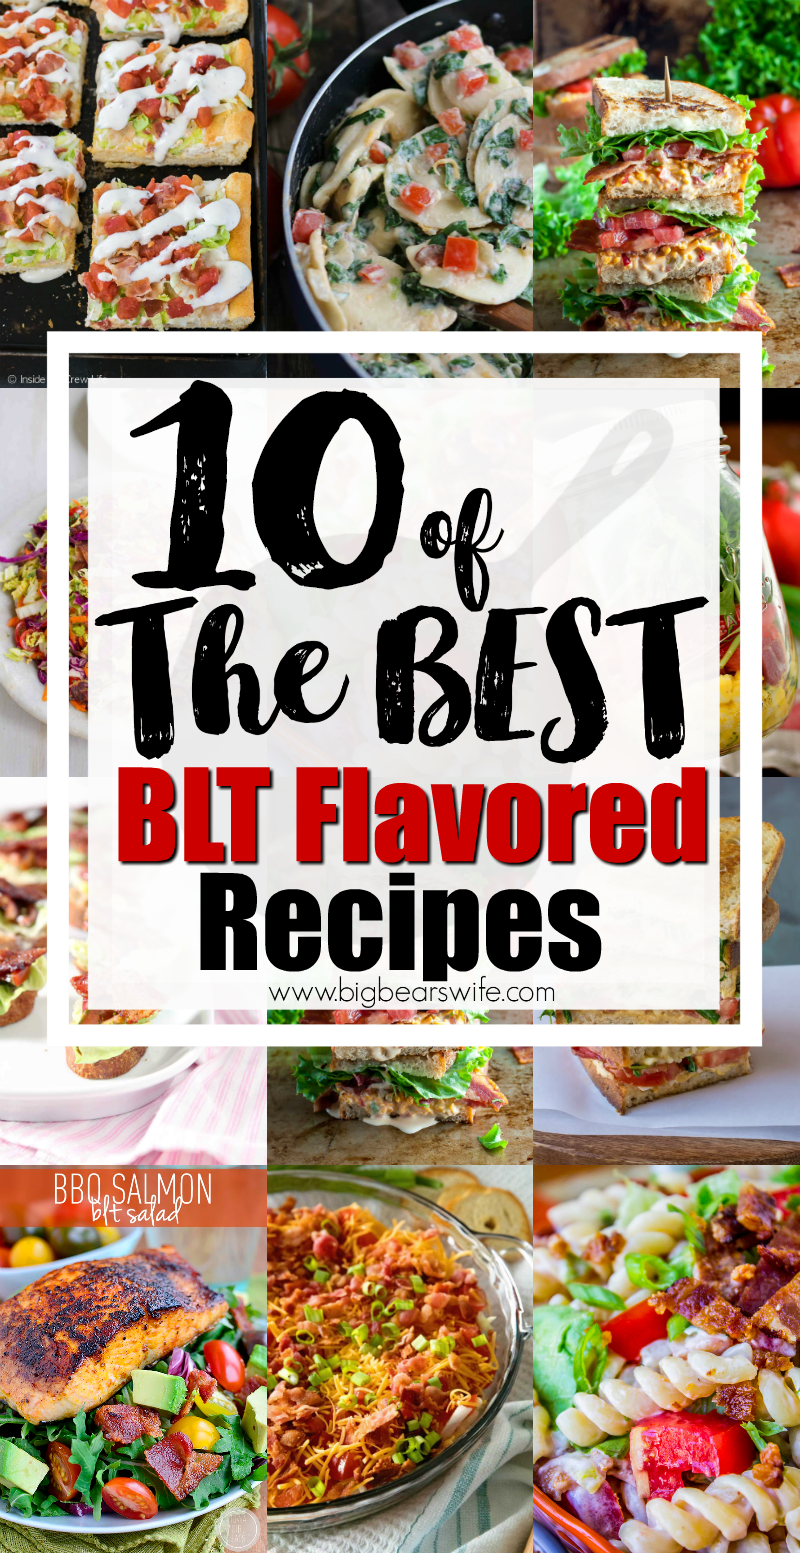 10 of the best BLT Flavored Recipes -  If you love BLT sandwiches, you're going to want to check out these amazing recipes because we've found 10 of the best BLT Flavored Recipes for y'all to try! #BLTRECIPE #BLT via @bigbearswife